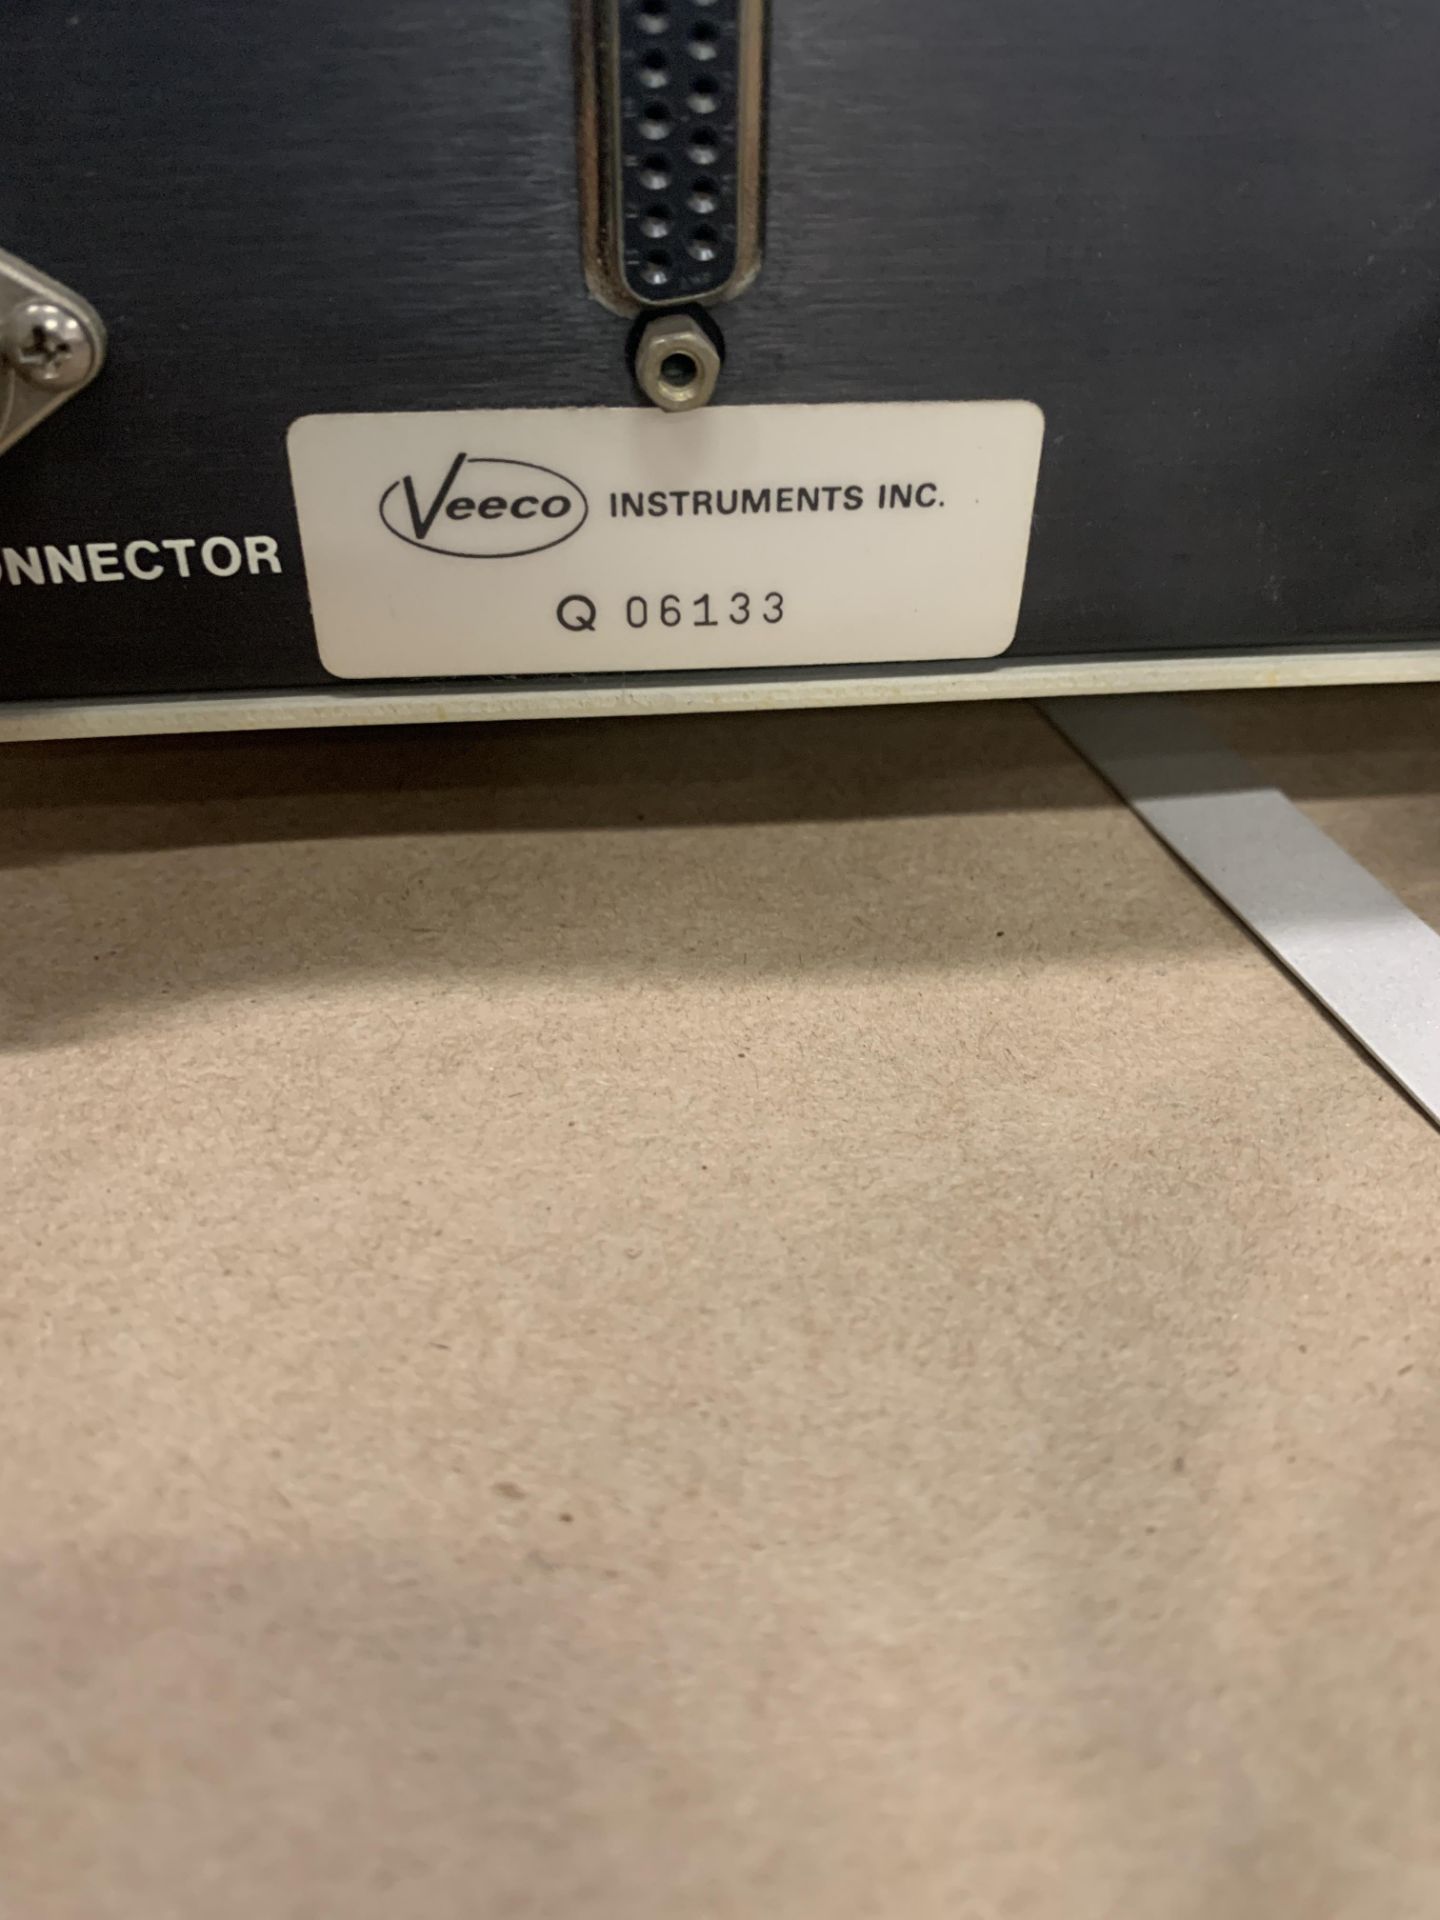 MICRODERM MP-700 Plating Gauge w/ DLG Isotope Leak Test - Image 9 of 11